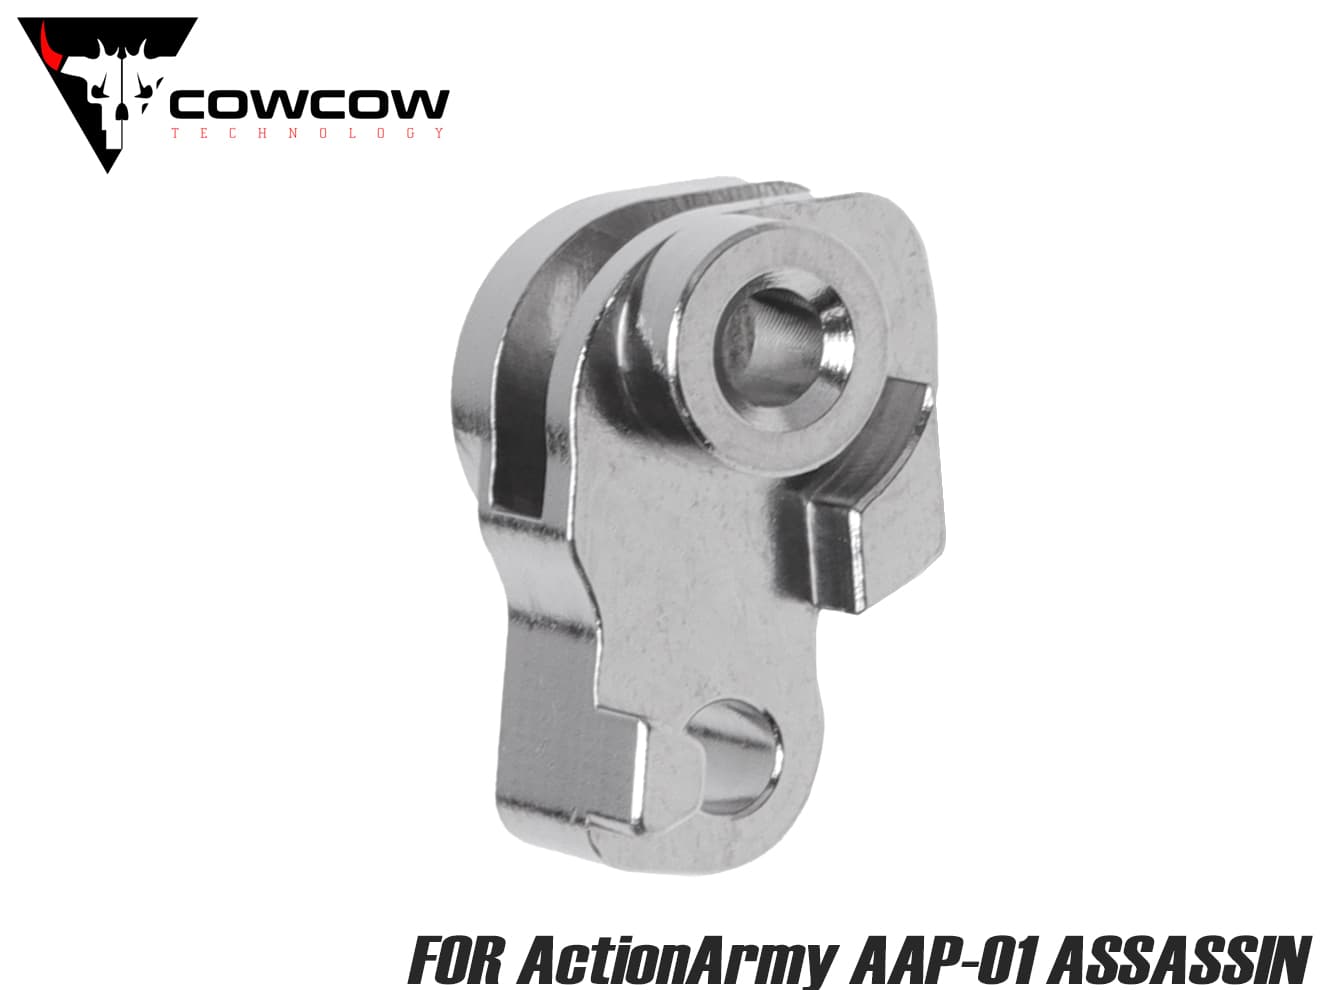 COWCOW TECHNOLOGY A7075 CNC 強化ローディングノズルフルセット for